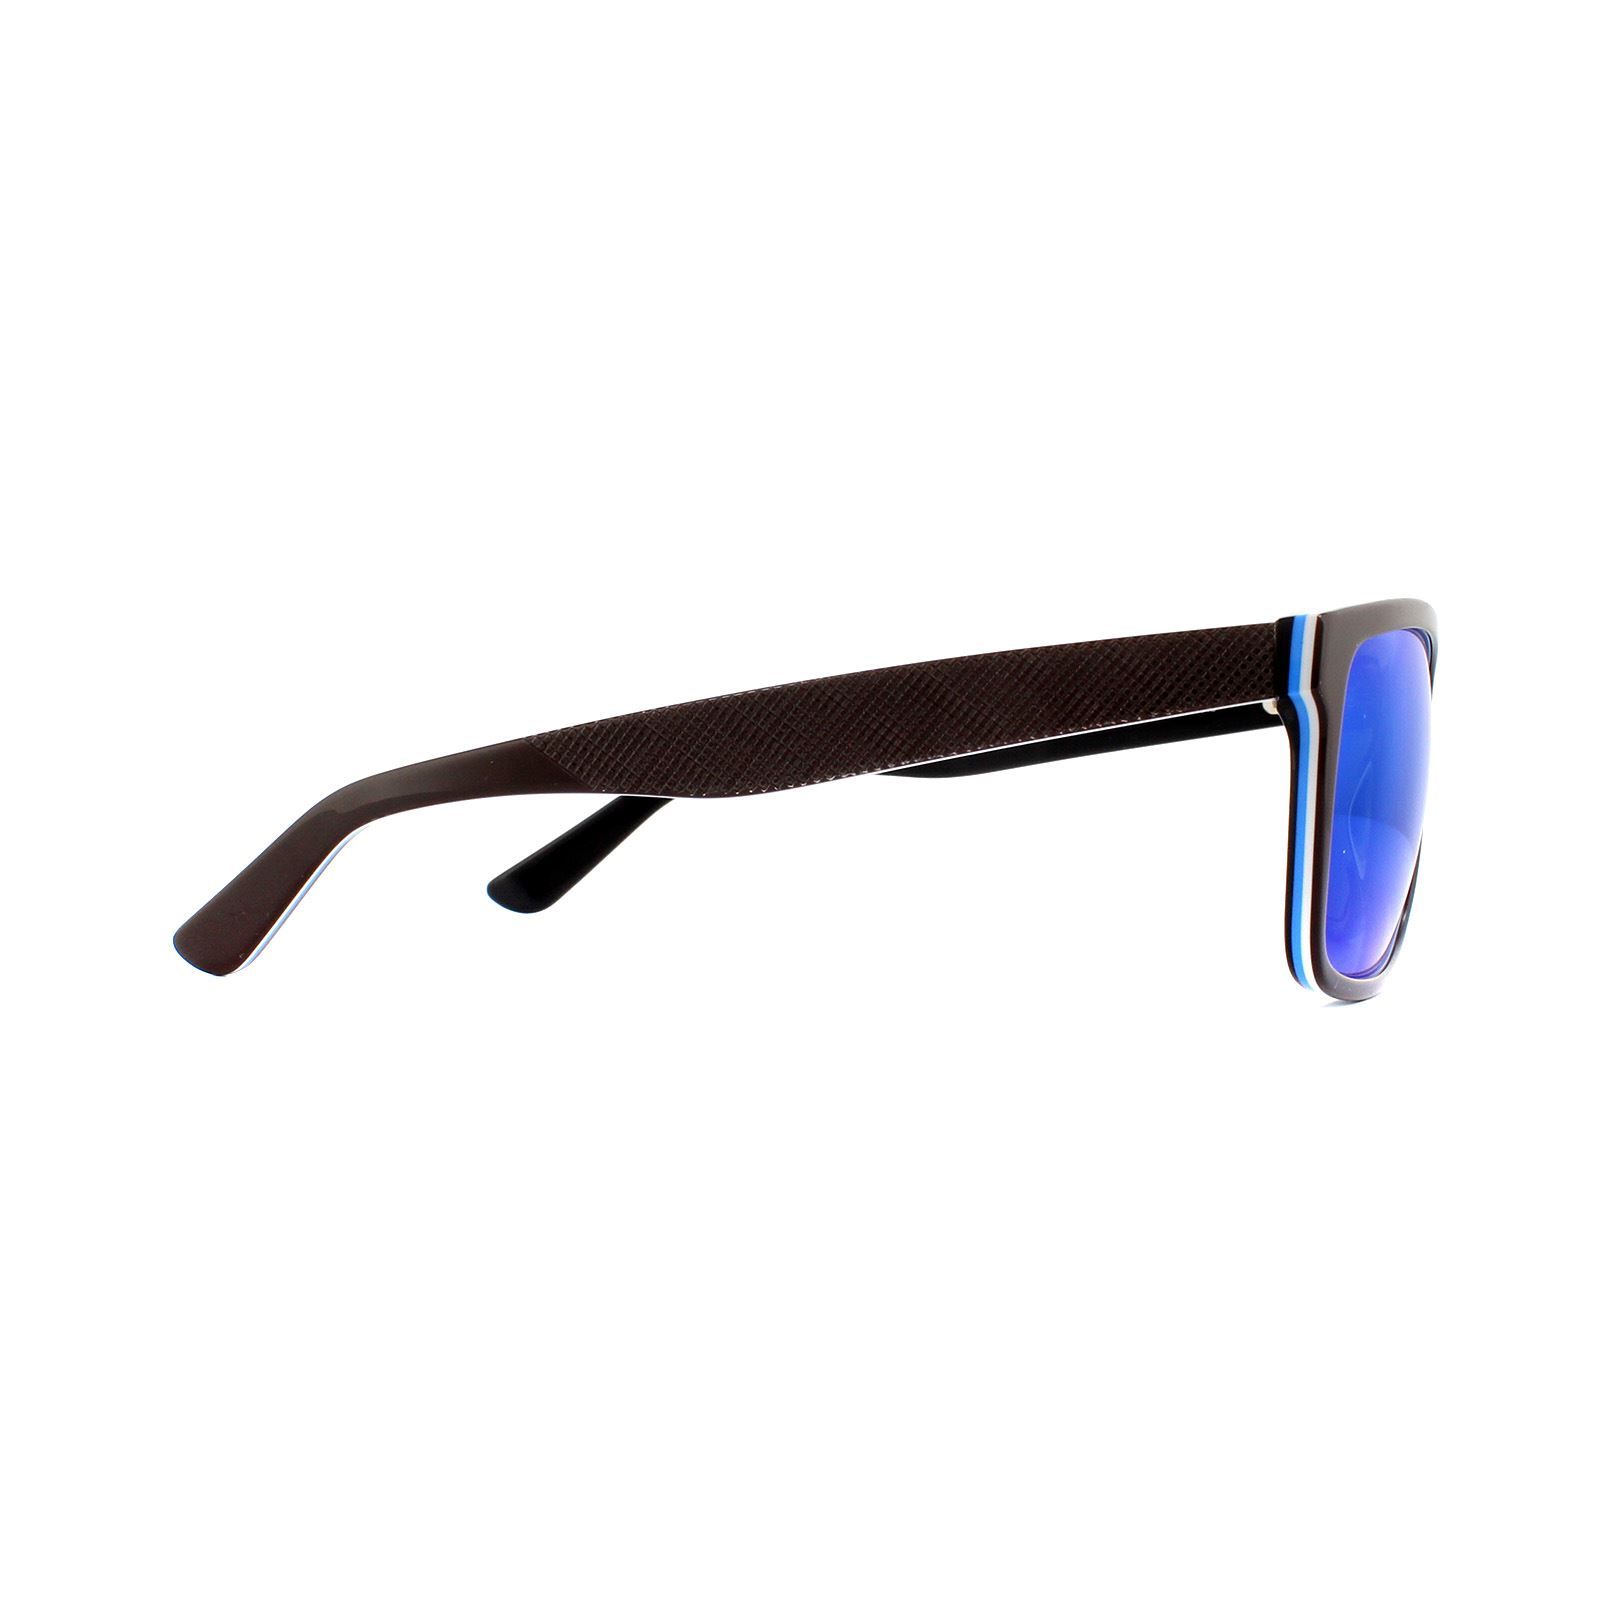 Lacoste Sunglasses L705S 234 Brown Blue Blue are a classic rectangular style with some nice touches of colour from Lacoste with the iconic alligator logo at the temples.